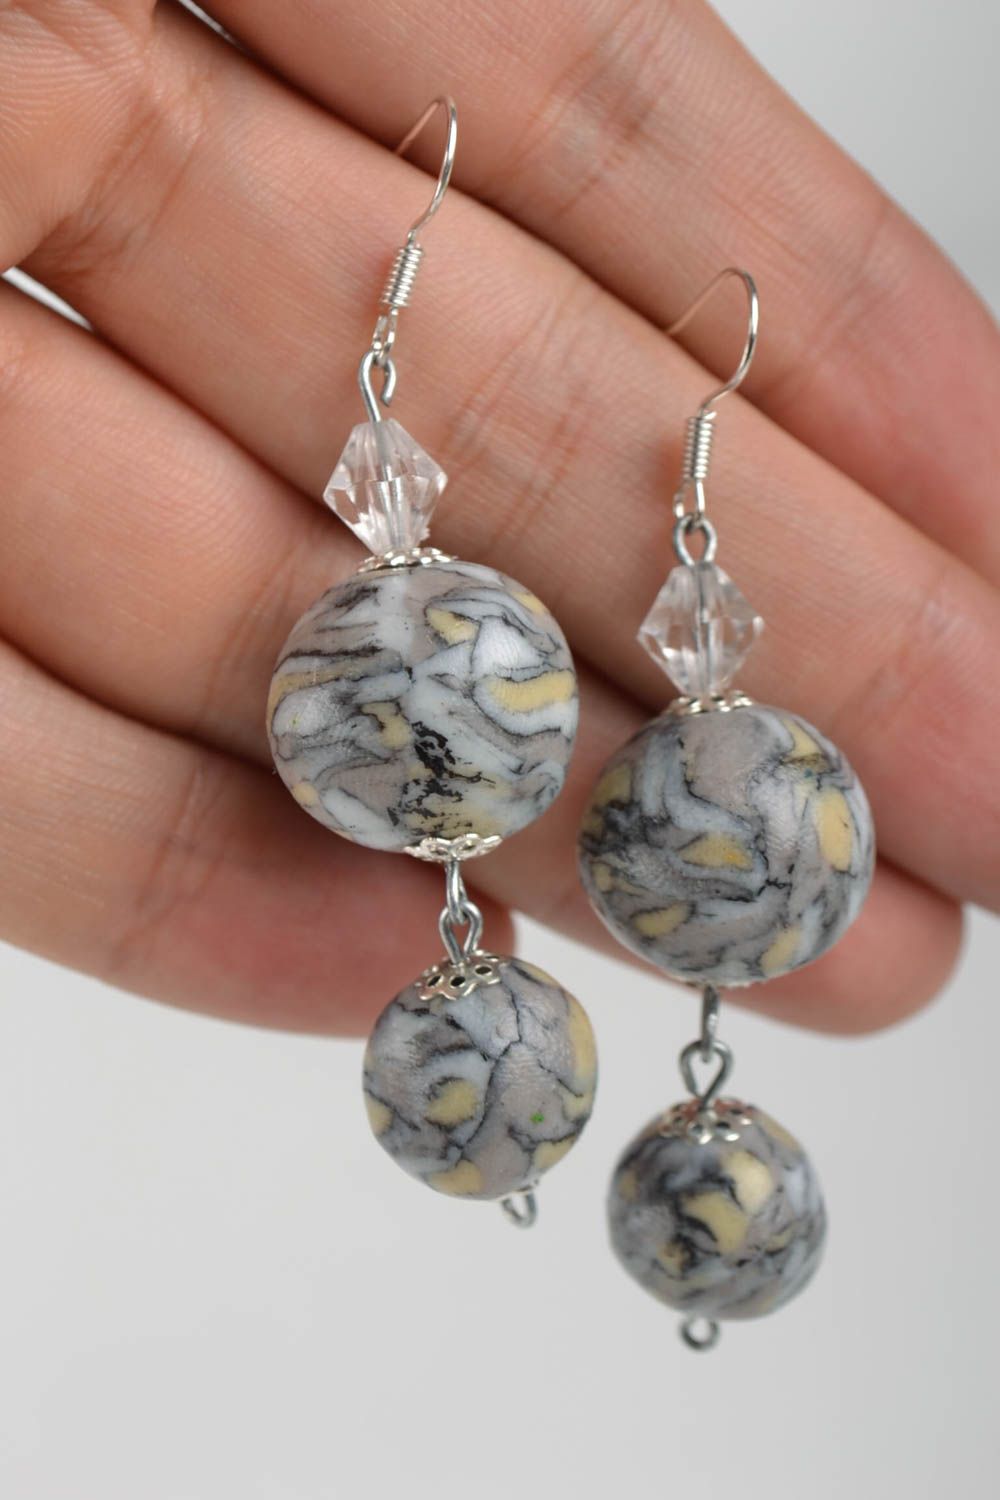 Ball earrings polymer clay handmade jewelry fashion accessories gifts for girls photo 5